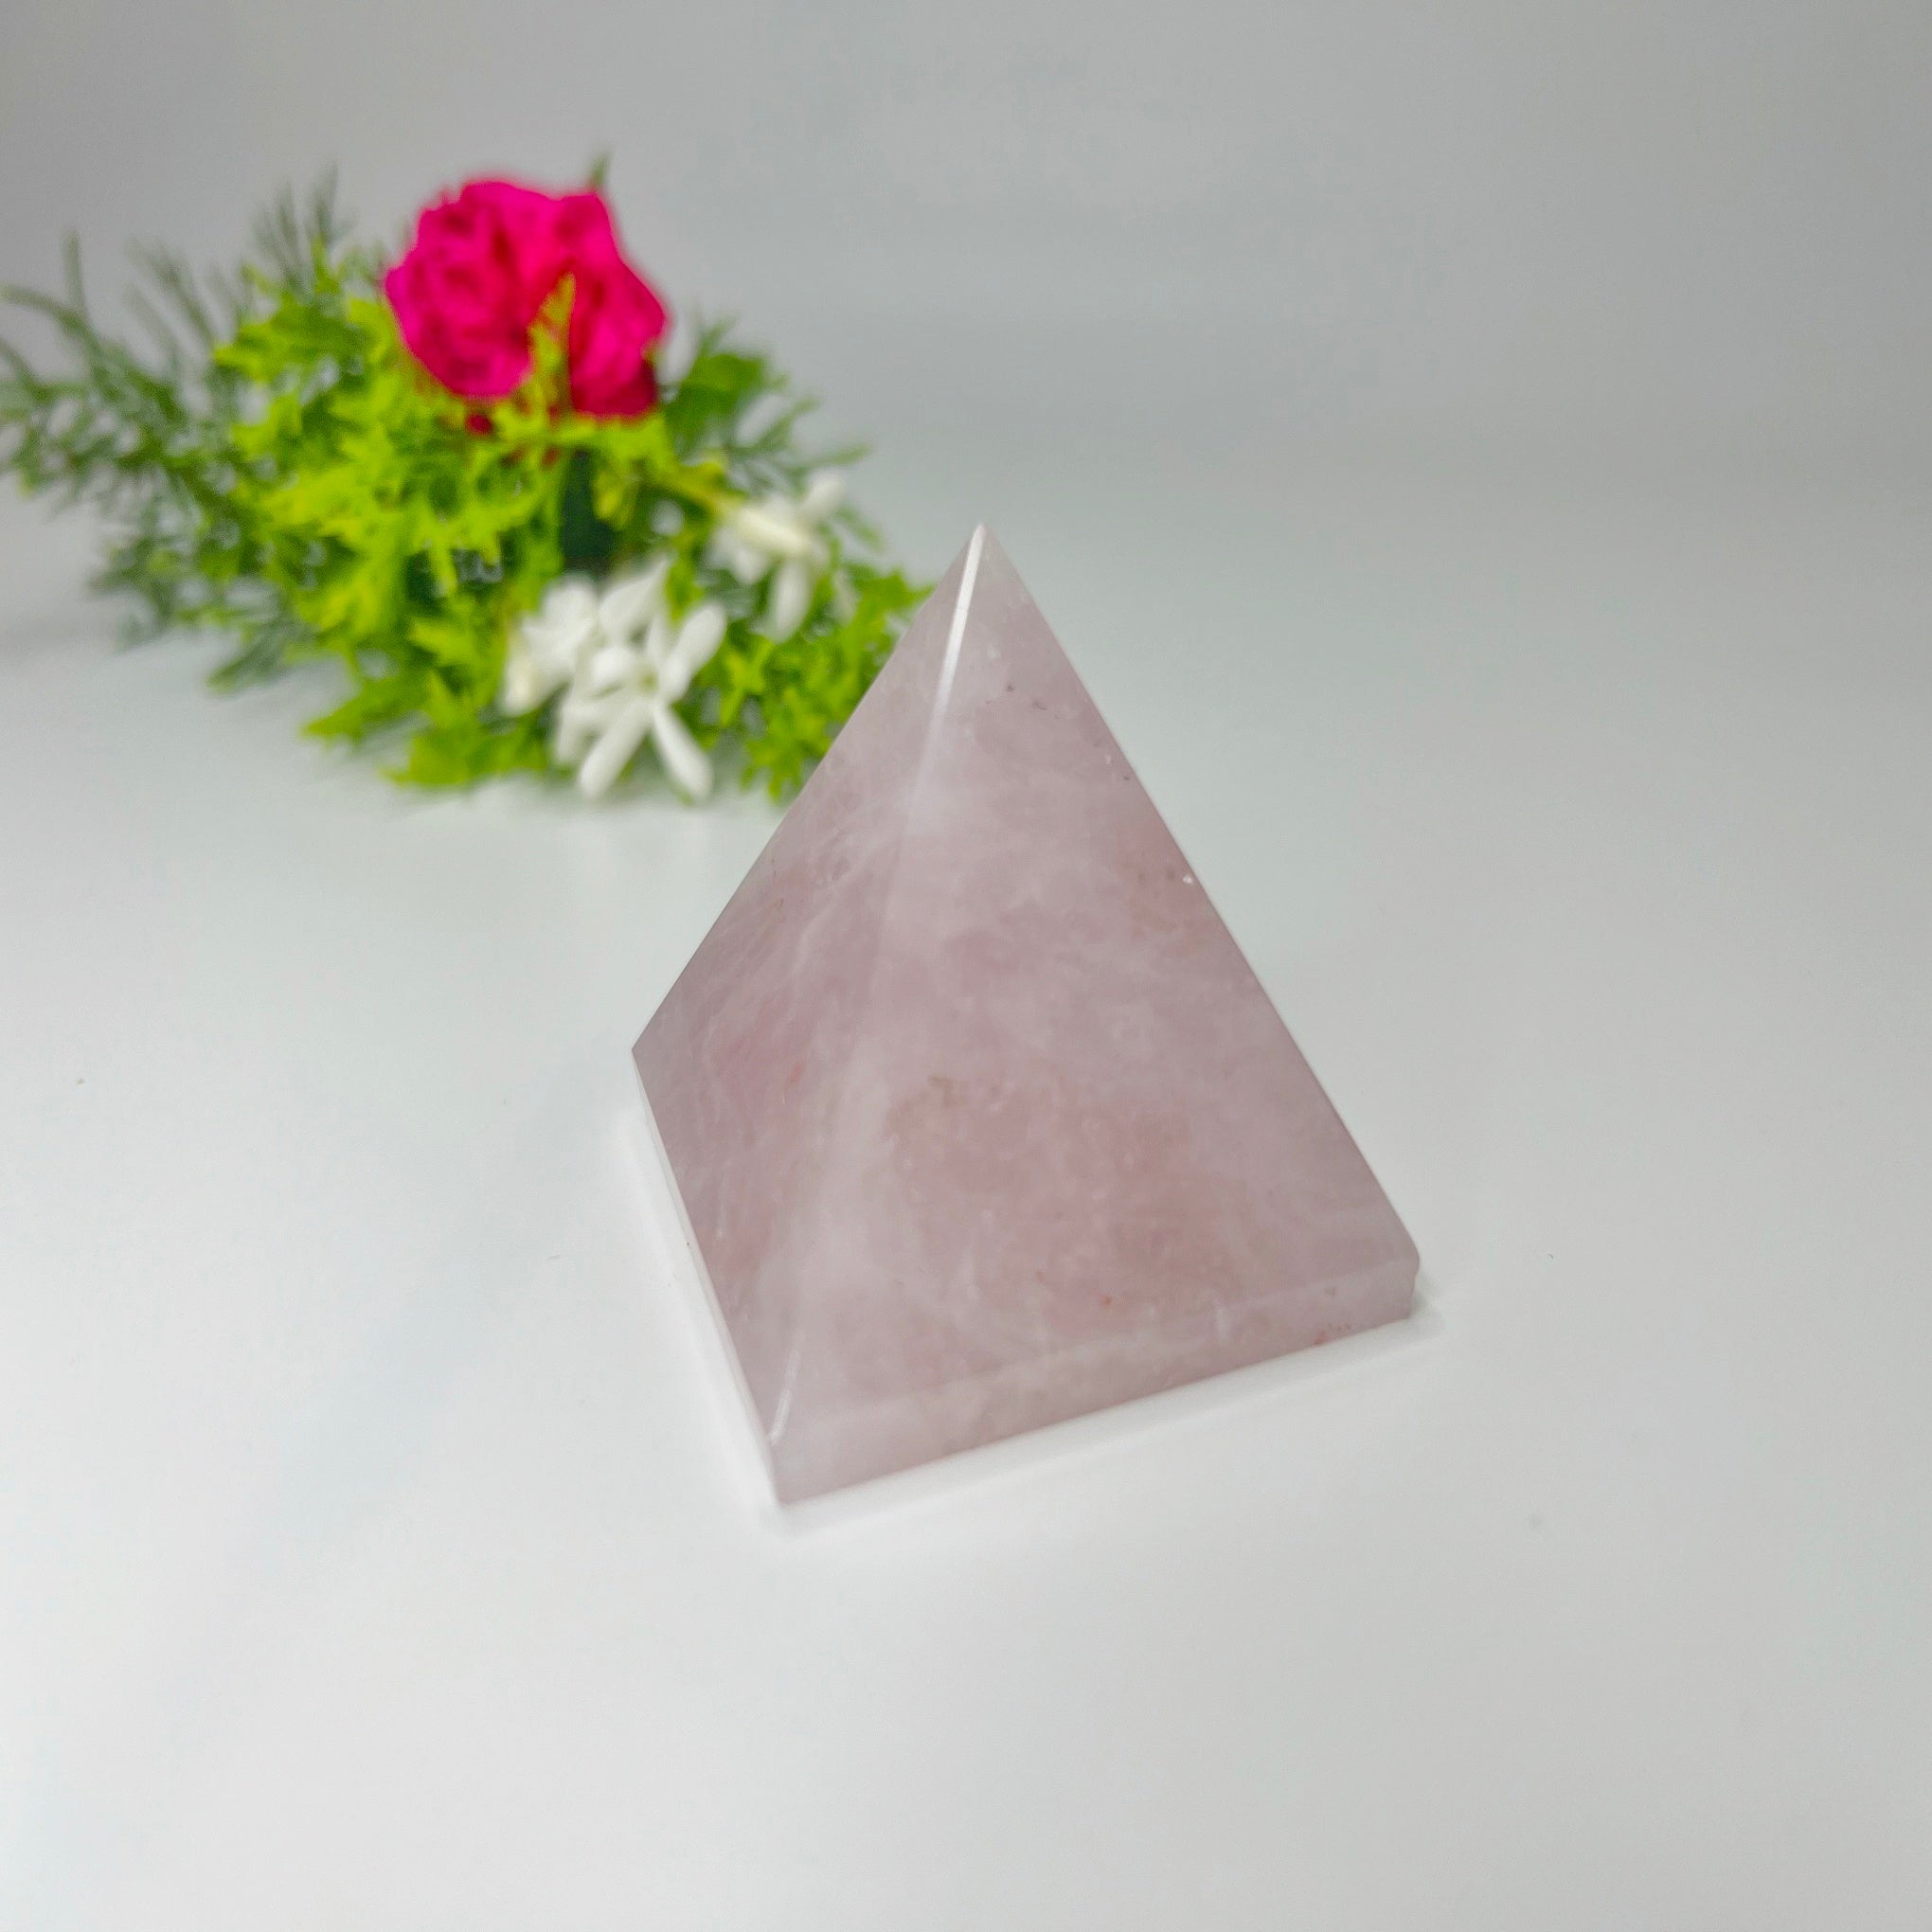 CERTIFIED ROSE QUARTZ CRYSTAL PYRAMID- LIGHT PINK COLOUR MEDITATION HEALING ACCESSORY CERTIFIED HOME OFFICE GIFT